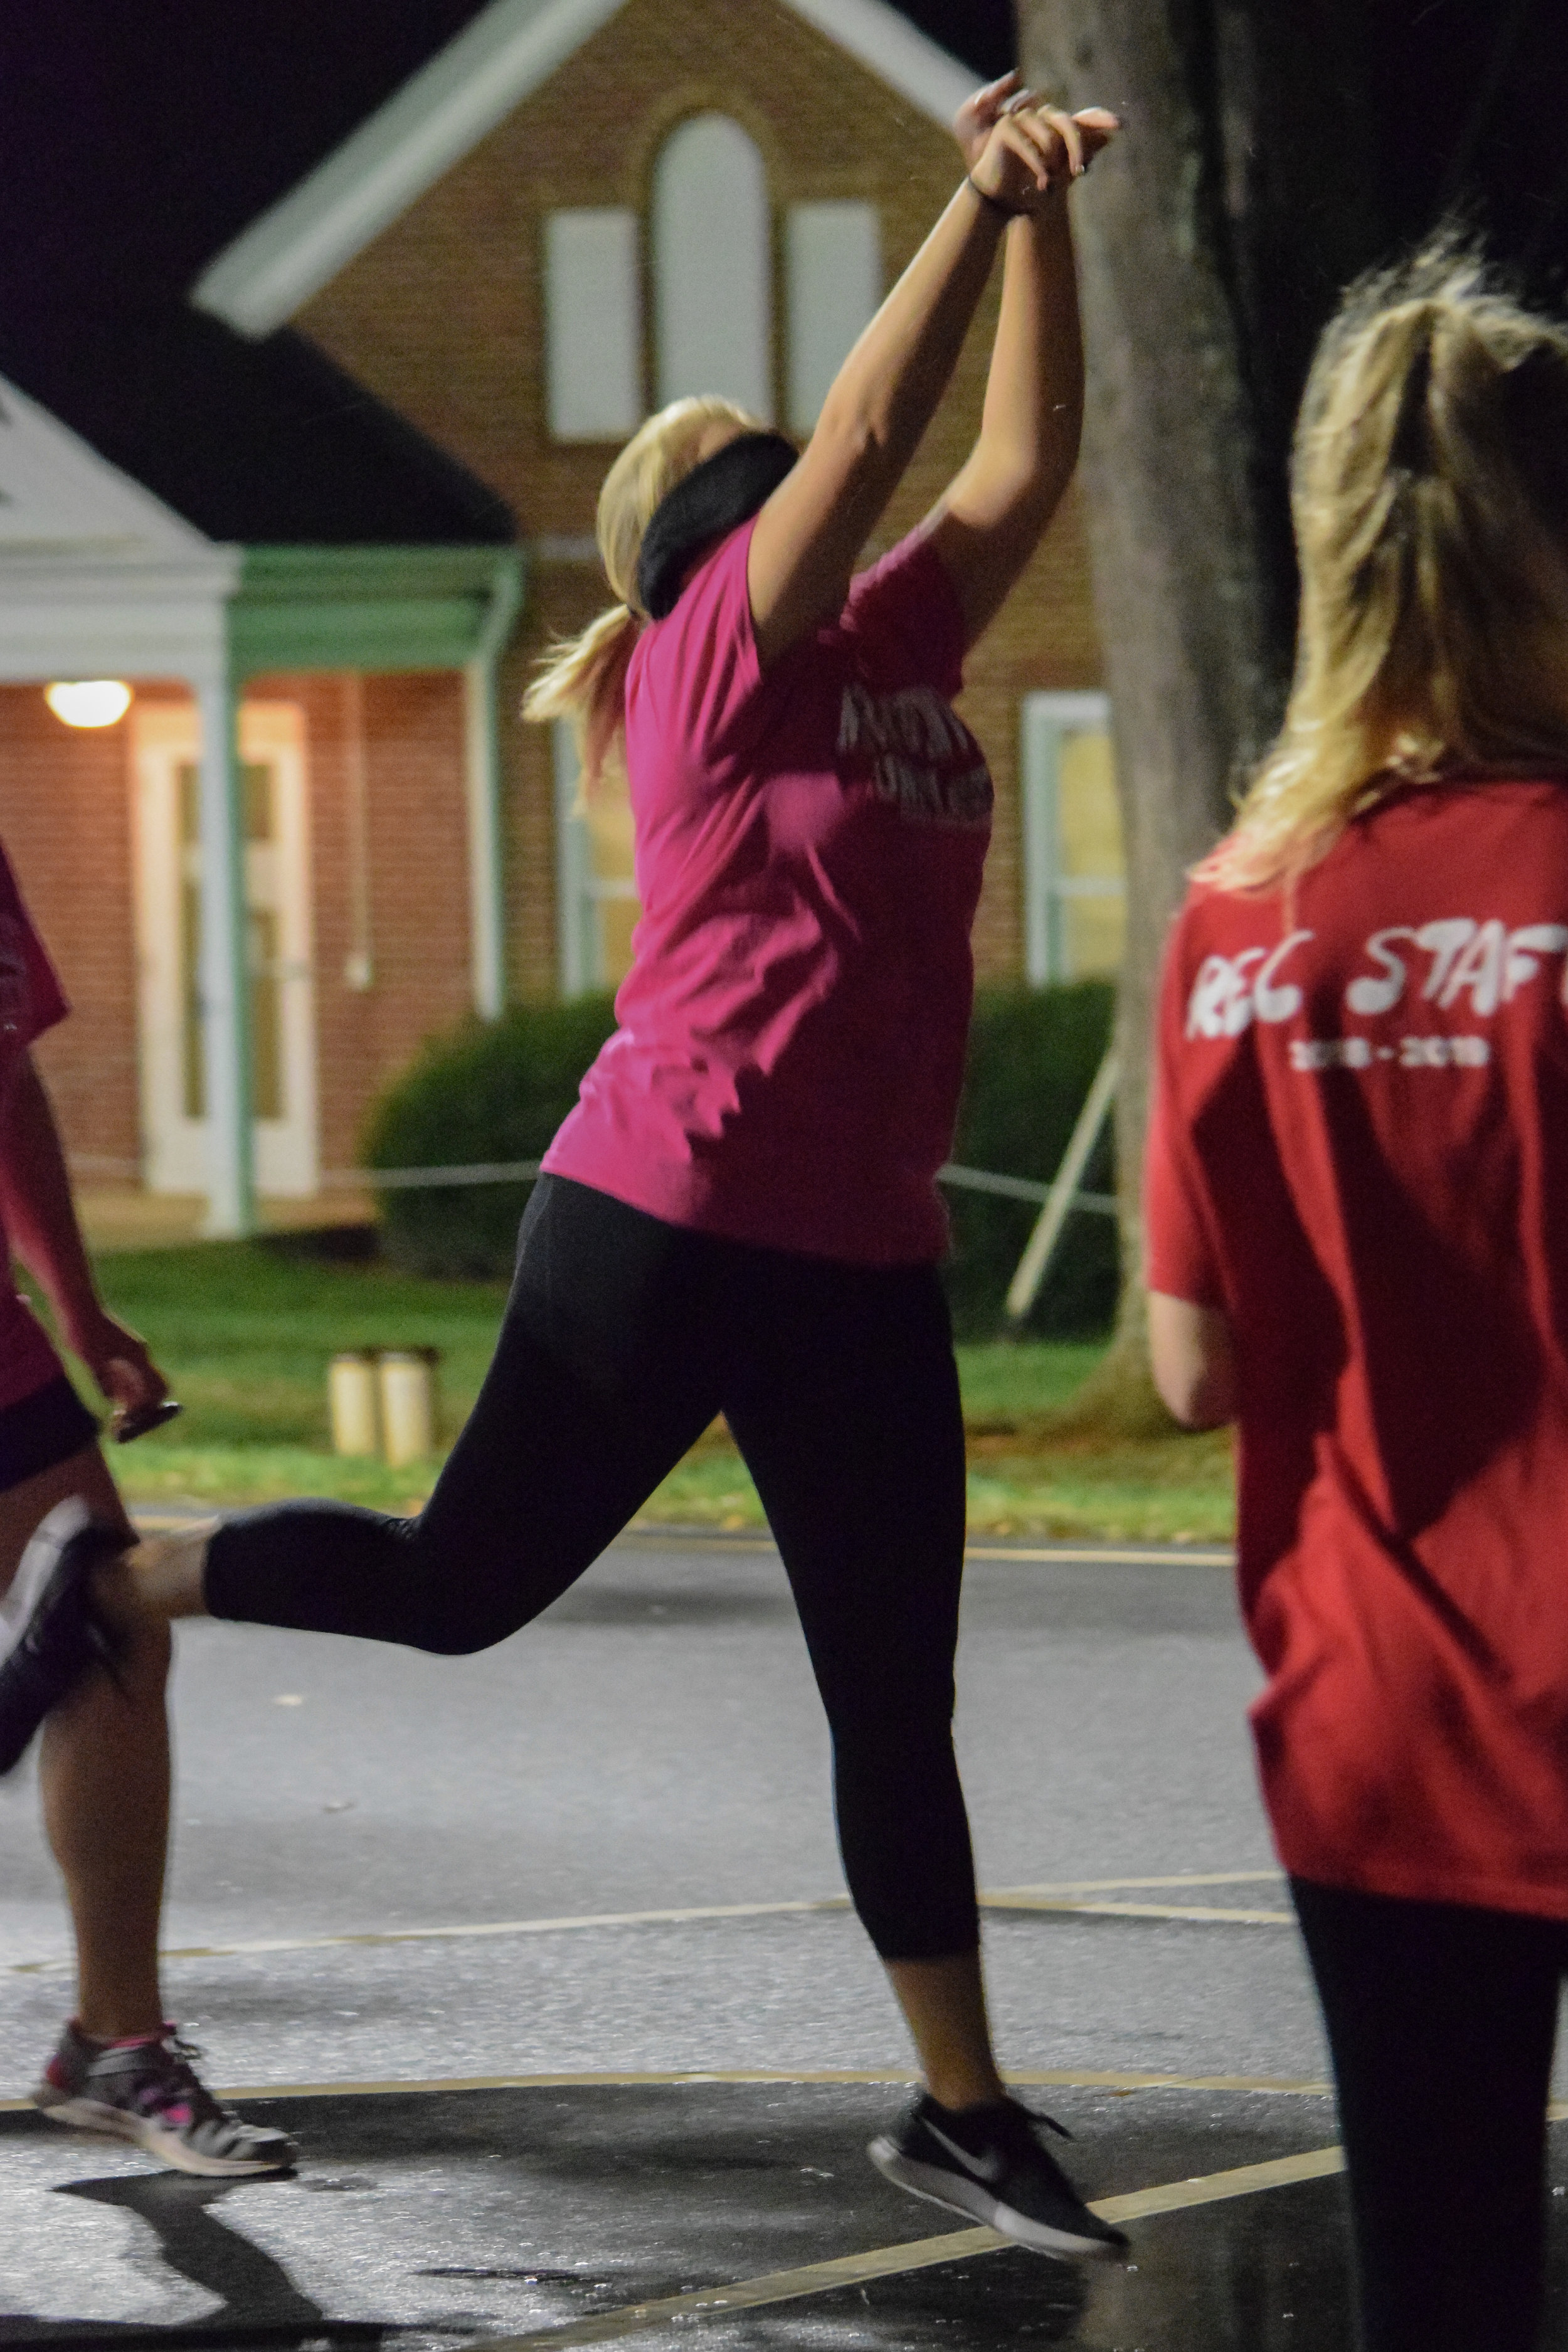 Big and Little club member Mary Collins, sophomore, makes the effort to make a basket in ten shots while blindfolded.